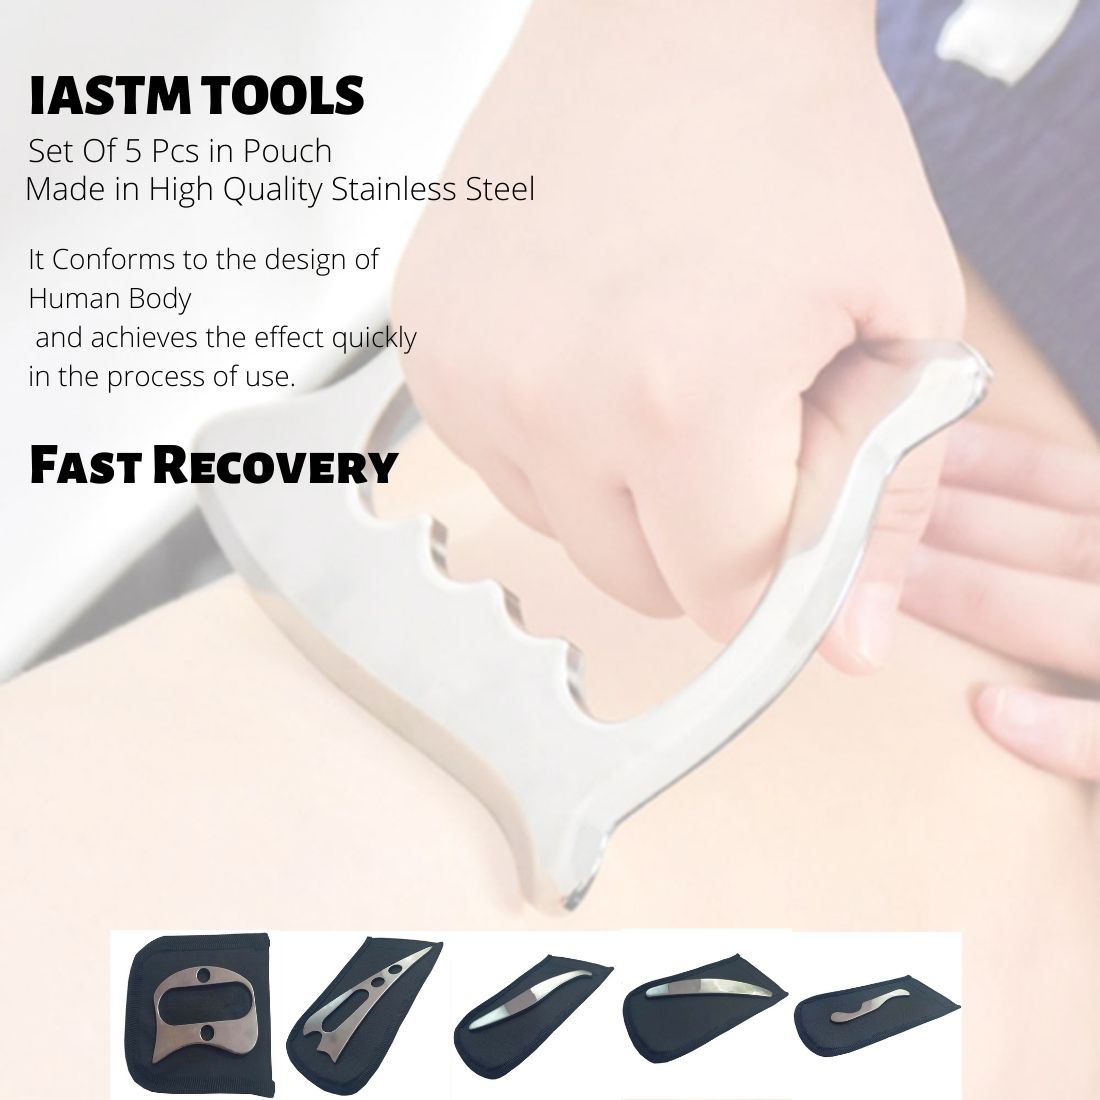 acco IASTM TOOLS for physiotherapy -Graston tool